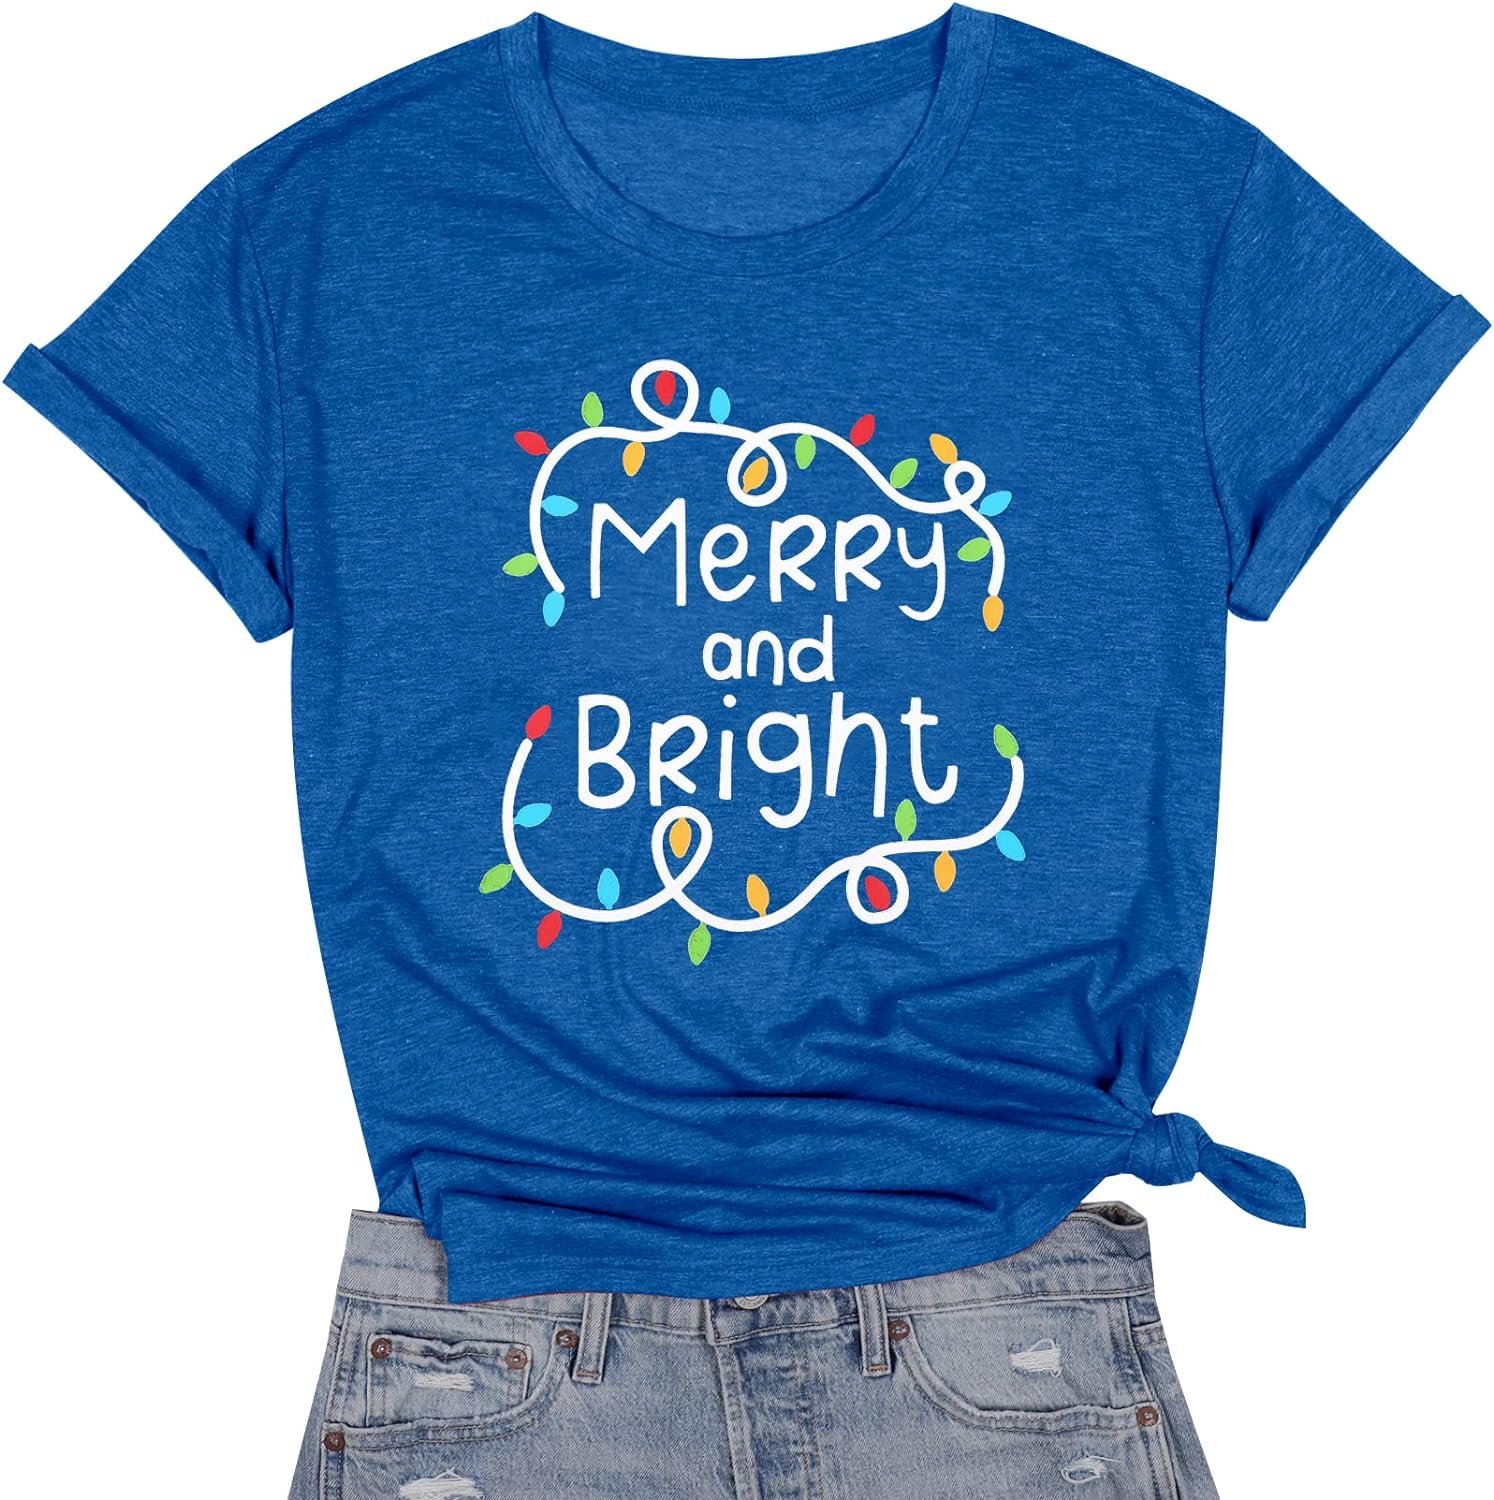 Christmas T Shirts for Women Merry and Bright Lights T-Shirt Letter Graphic Shirt Tee Tops Cute Print Short Sleeve Blouse